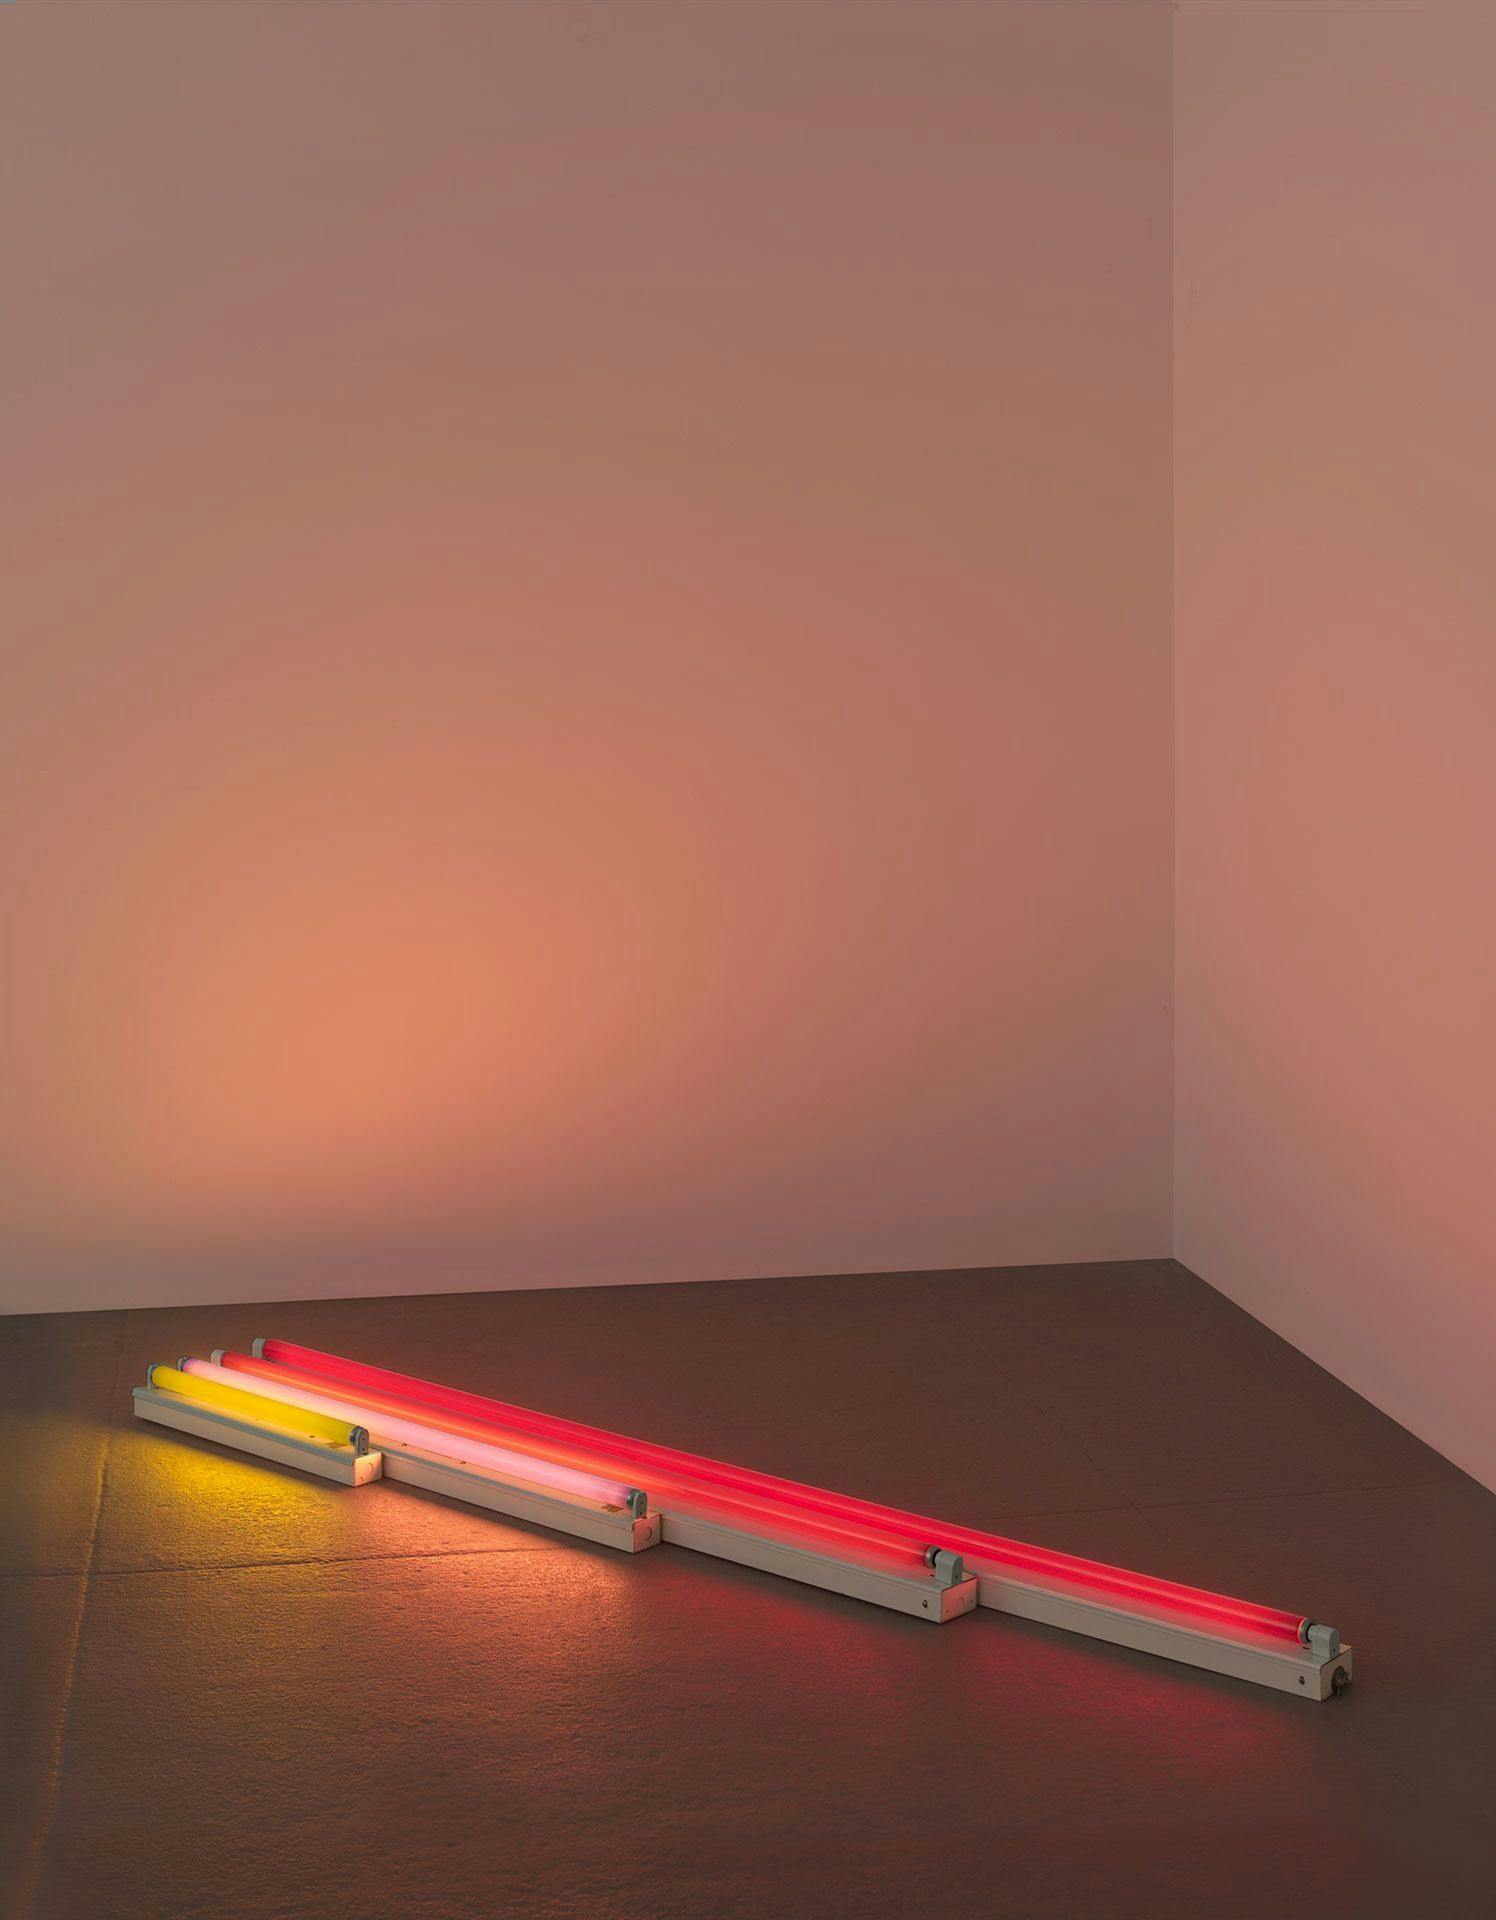 A sculpture in yellow, pink, and red fluorescent light by Dan Flavin, titled gold, pink and red, red, dated 1964.